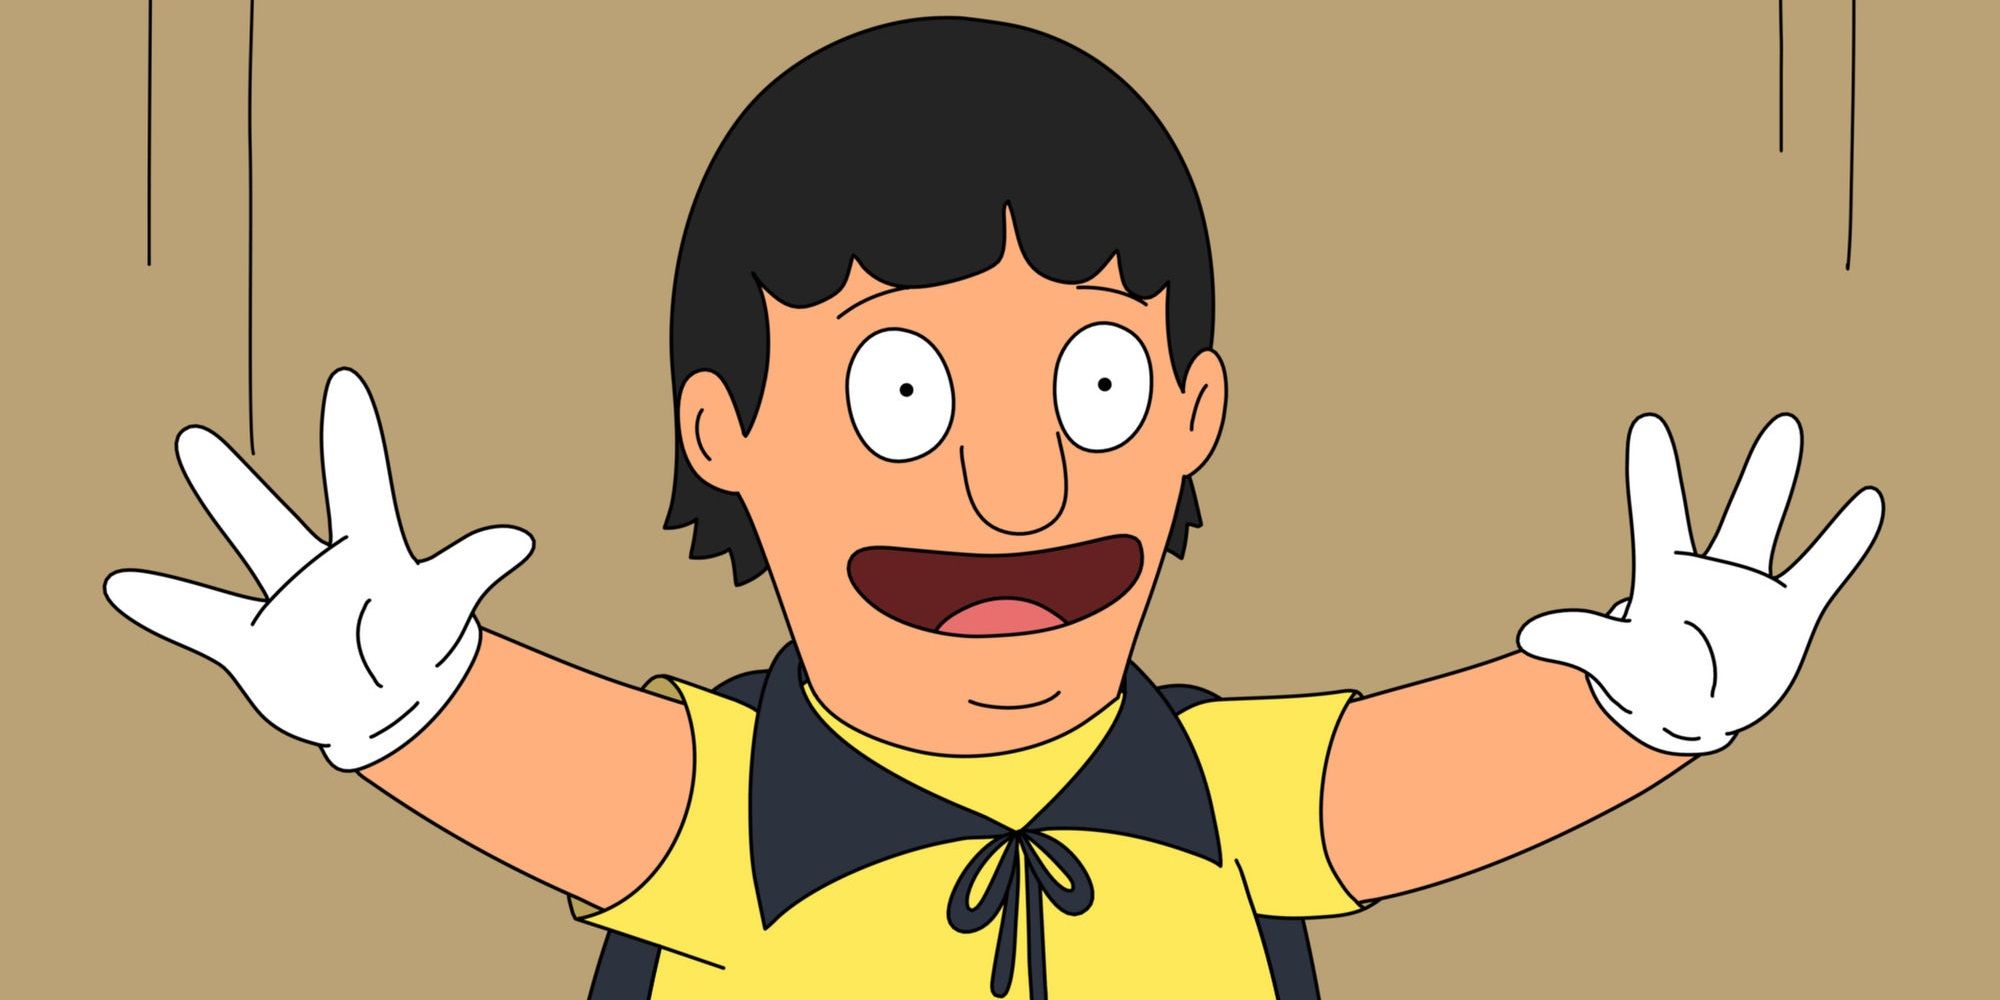 10 Wildest & Most Fascinating Bobs Burgers Fan Theories About The Show